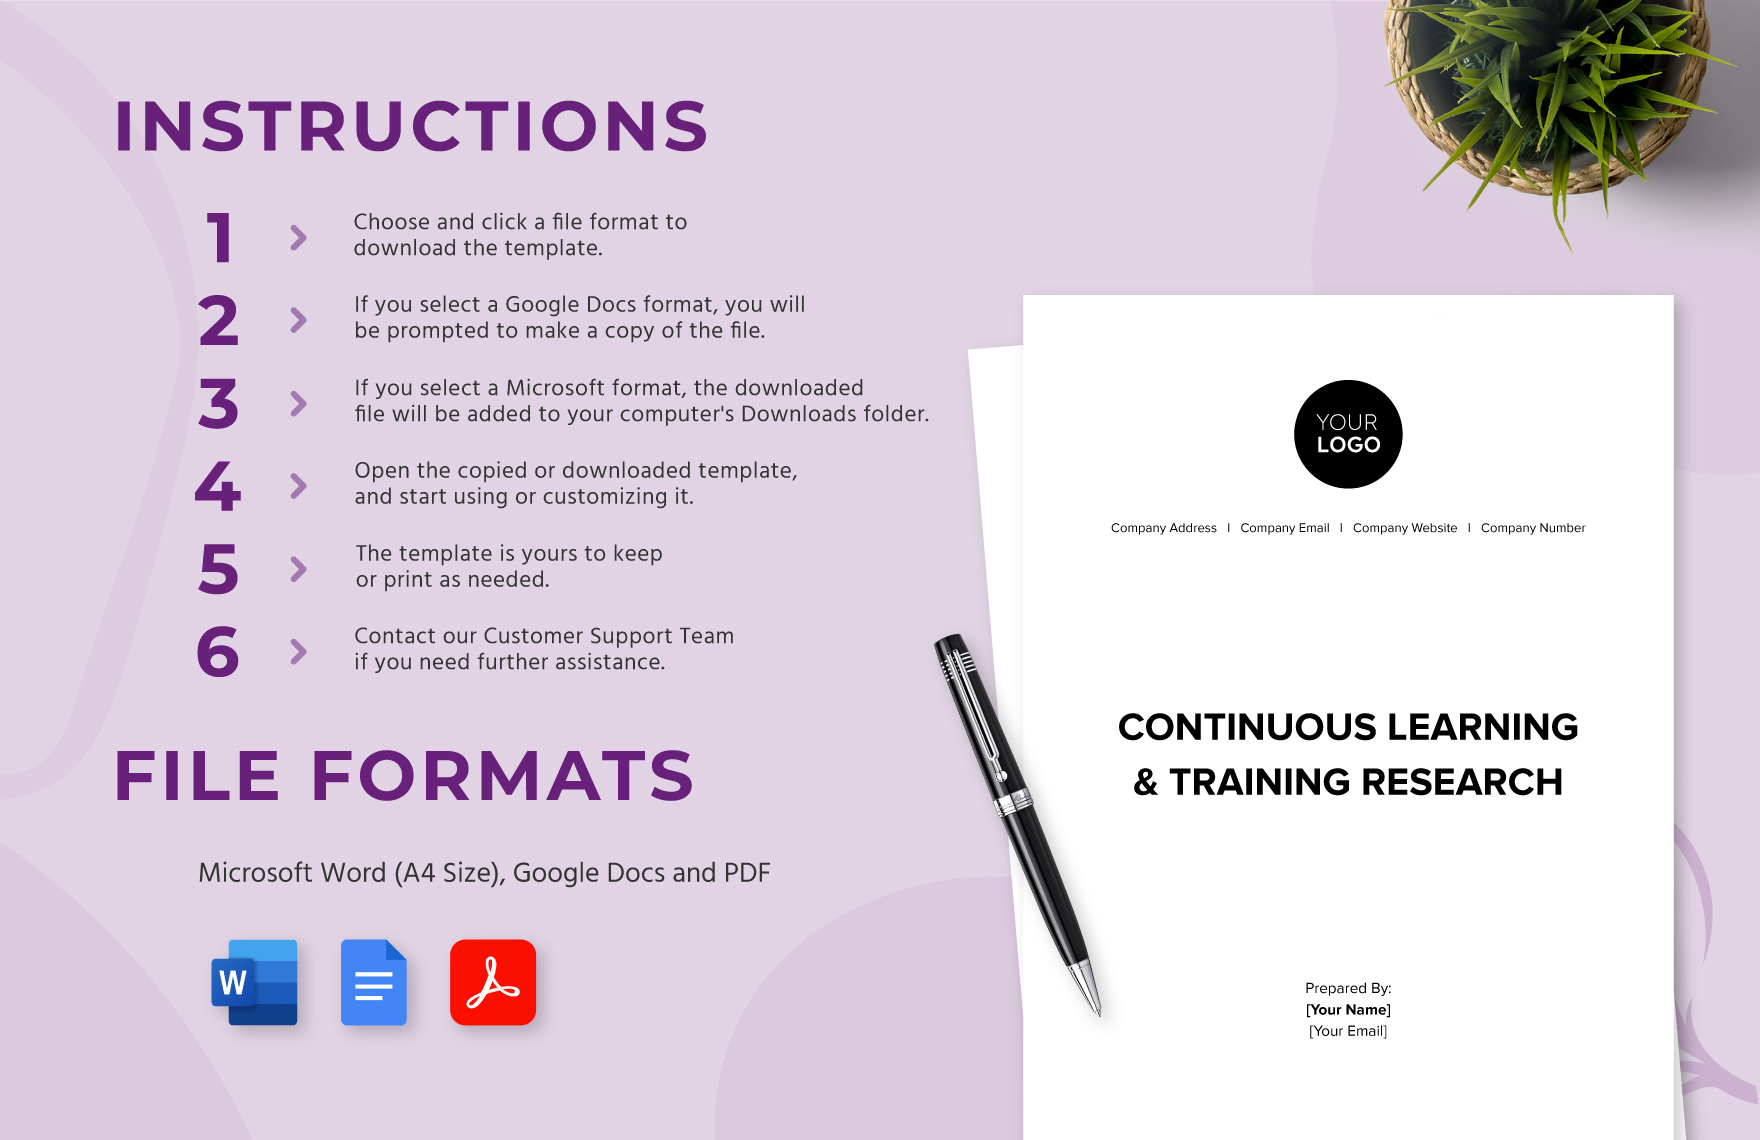 Continuous Learning & Training Research HR Template